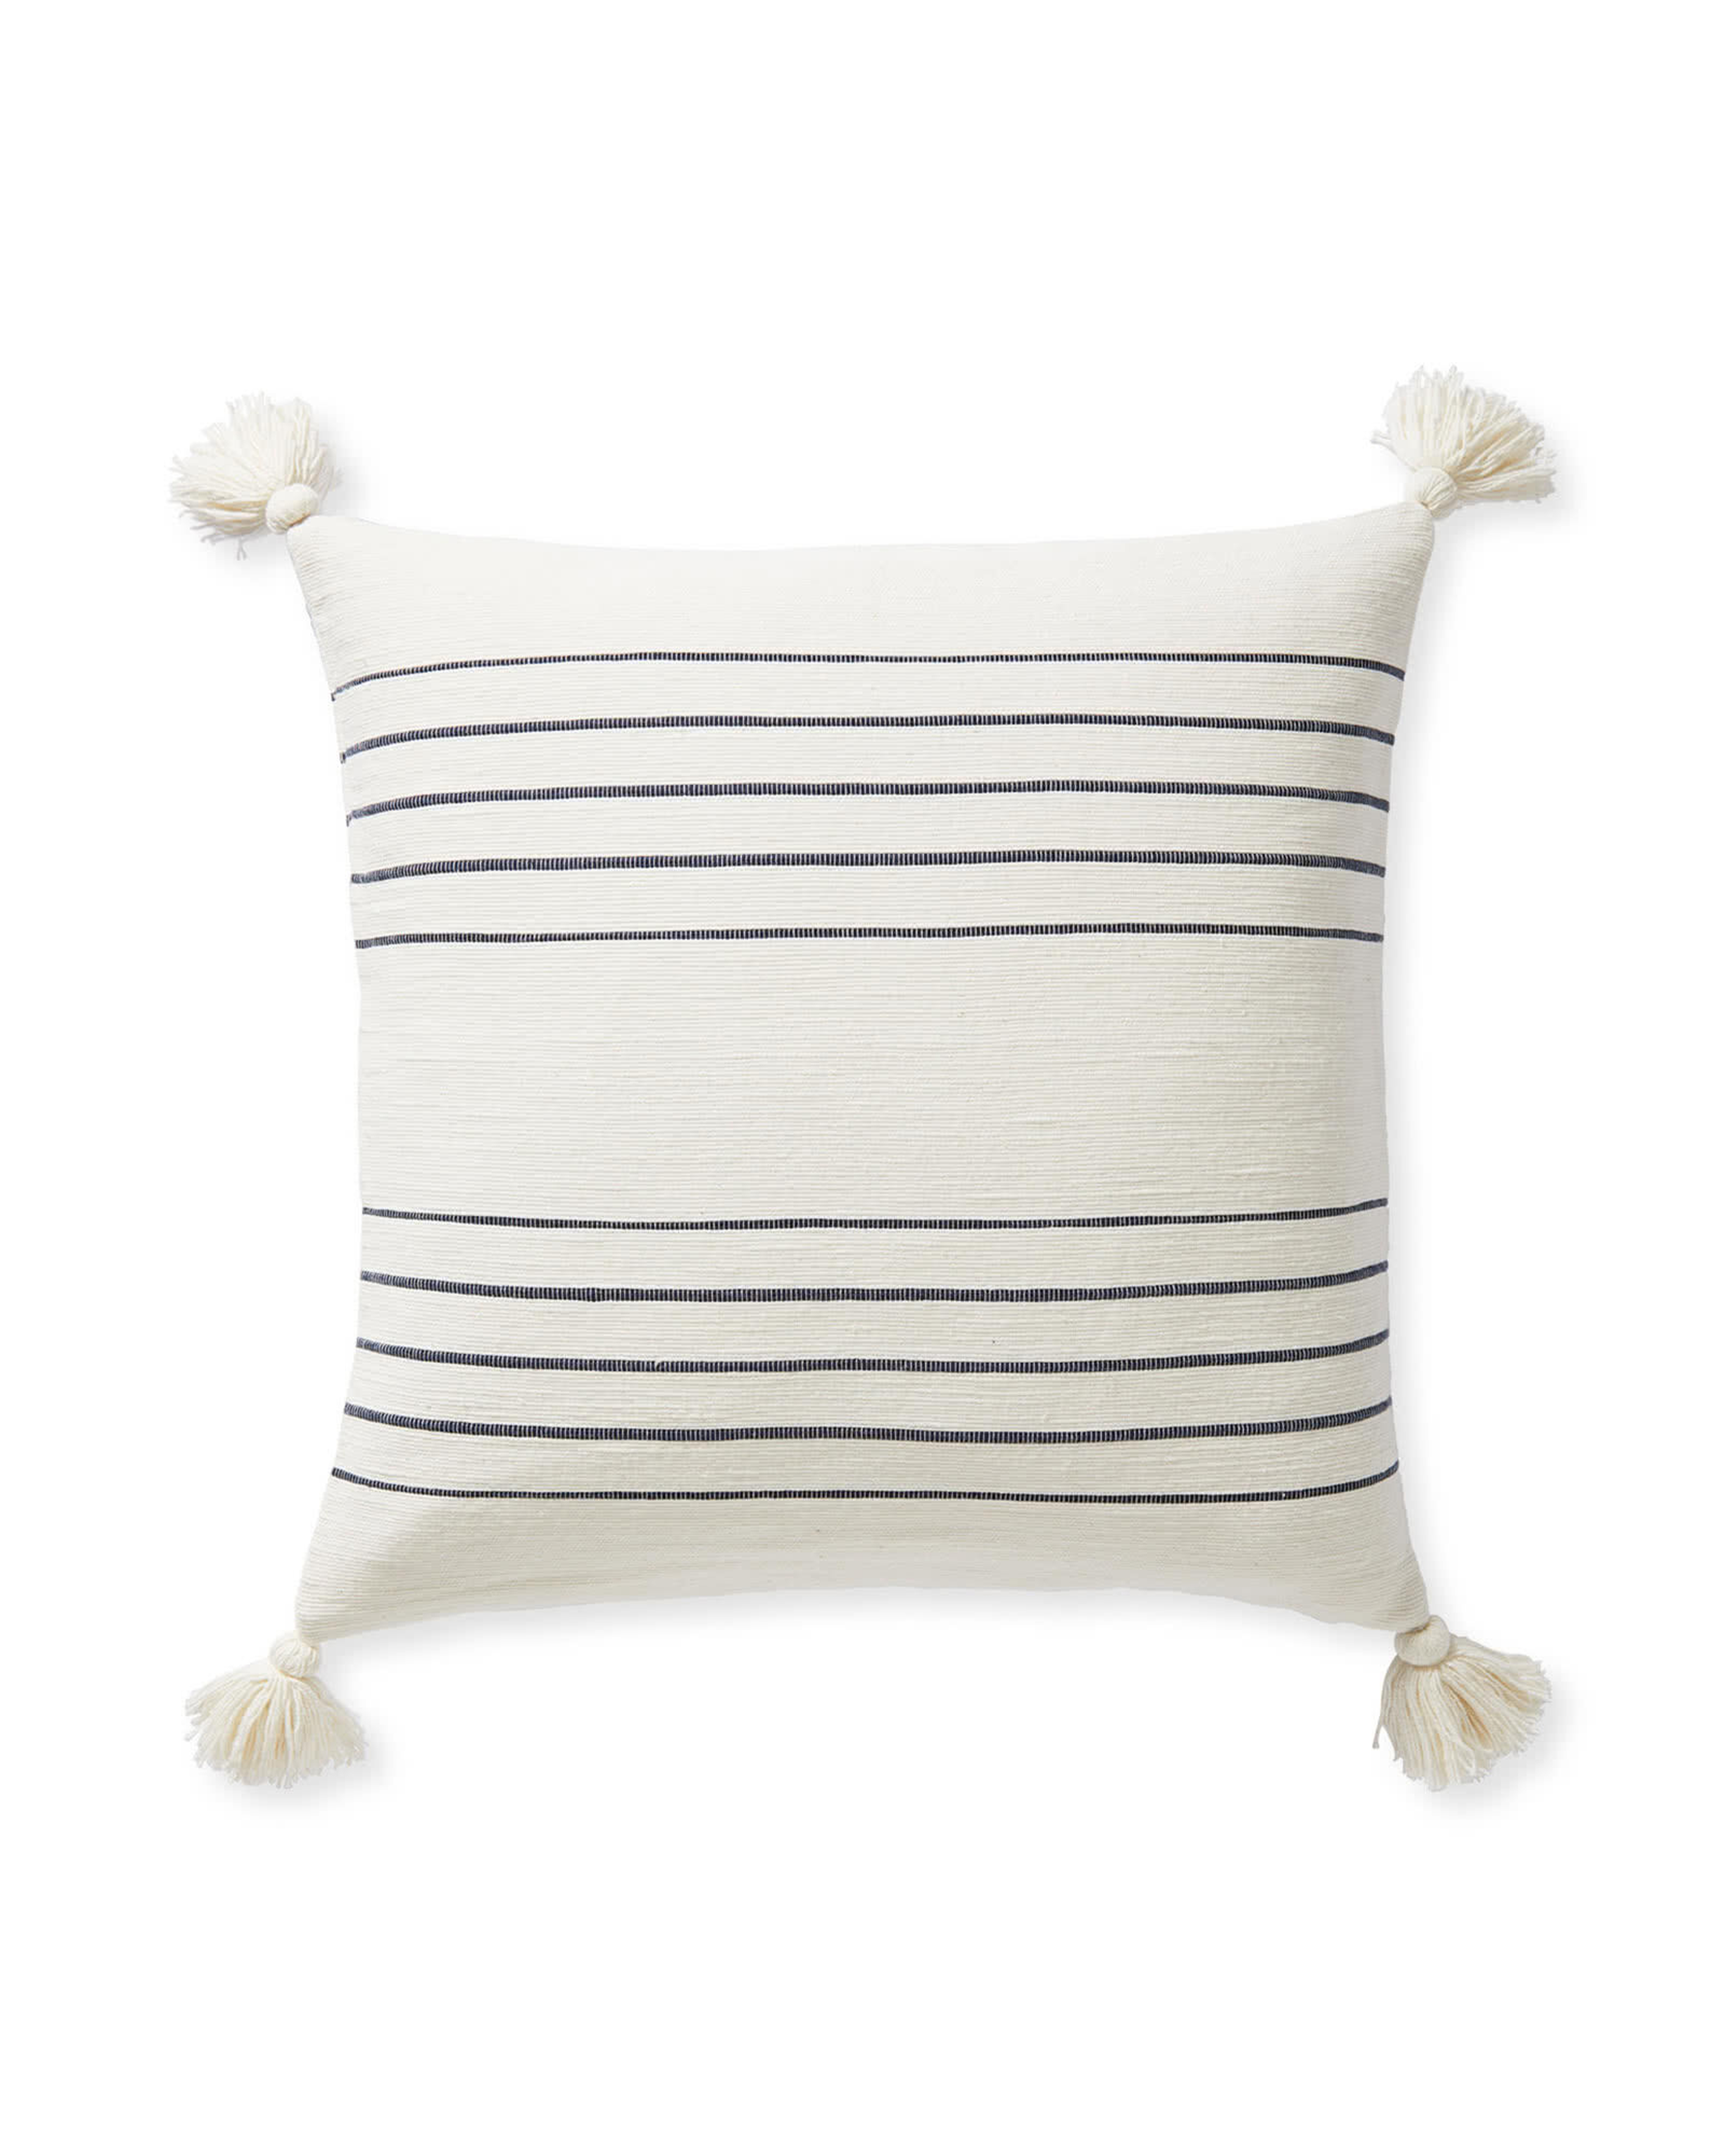 Del Mar Pillow Cover - Serena and Lily